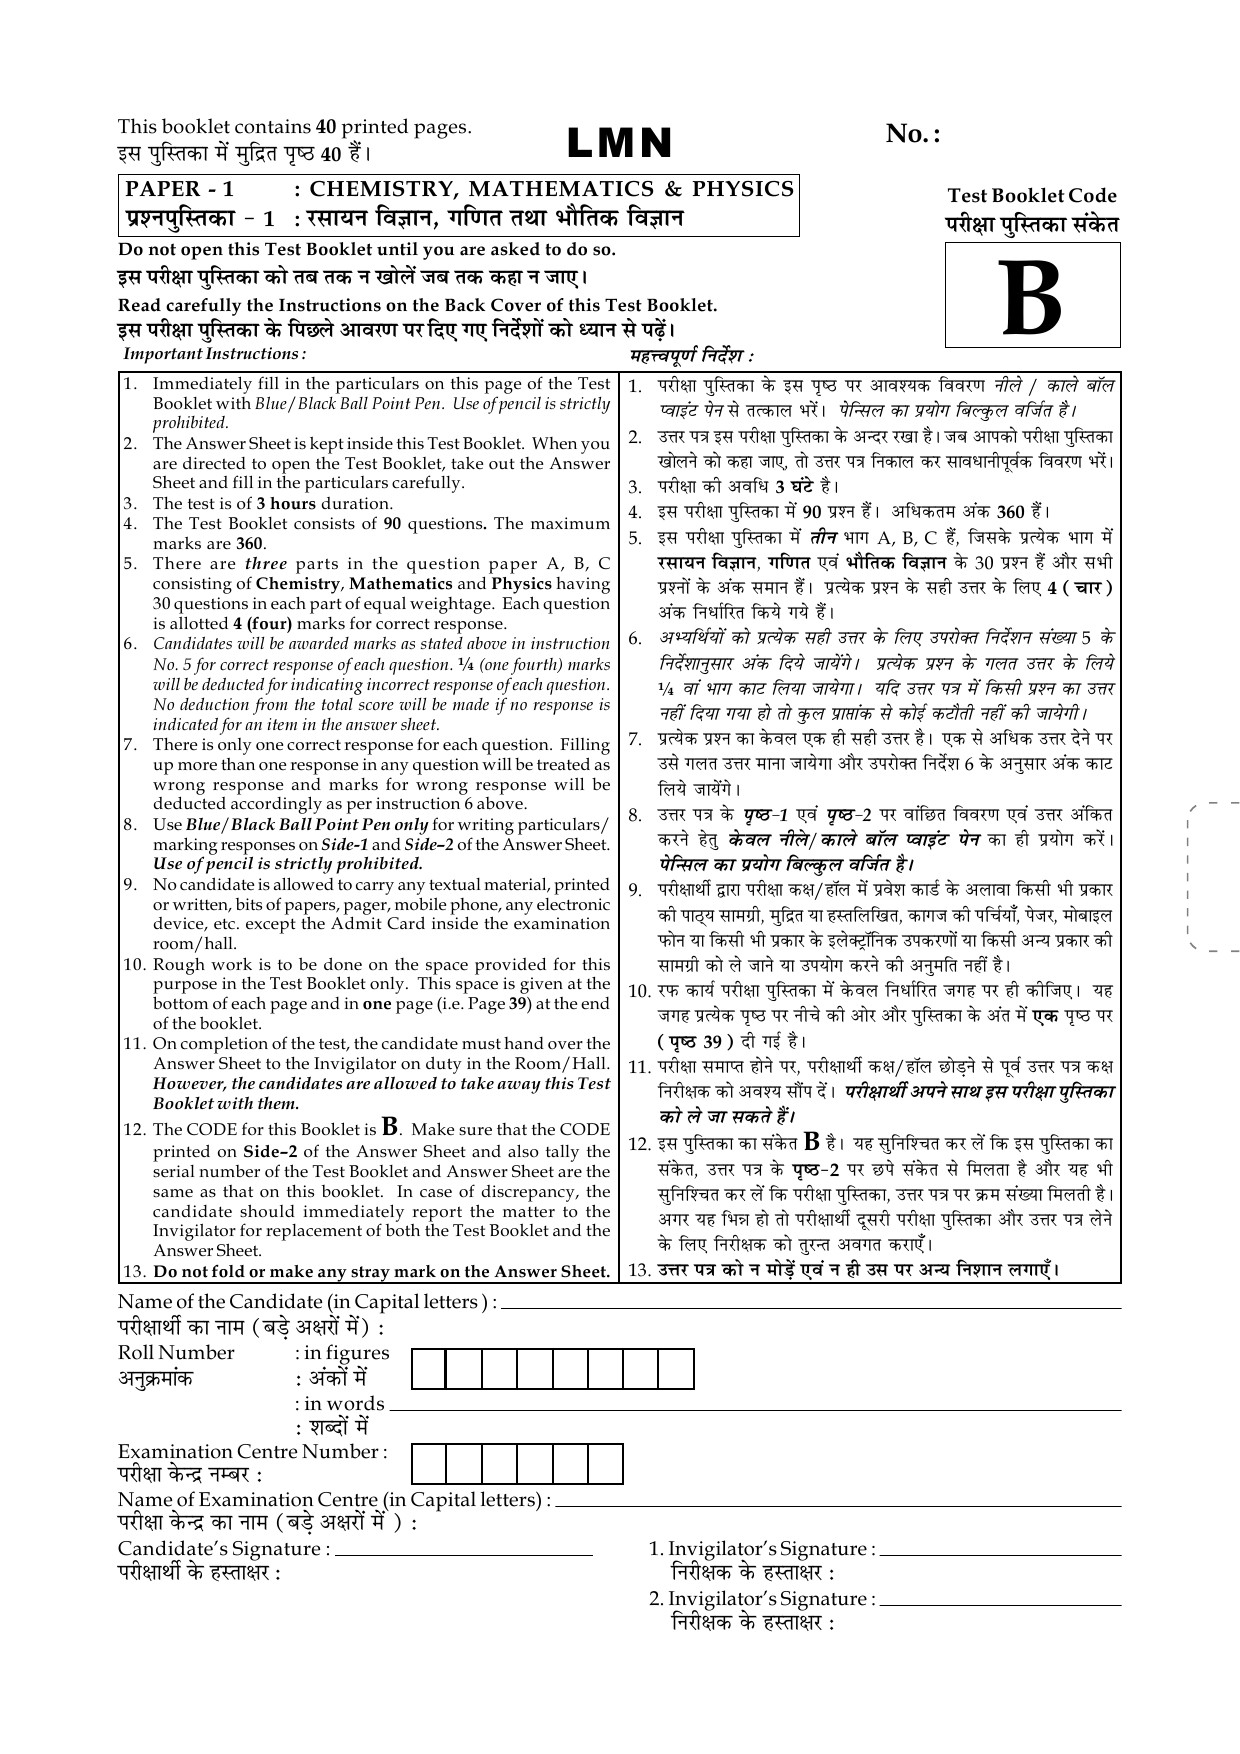 JEE Main Exam Question Paper 2015 Booklet B 1